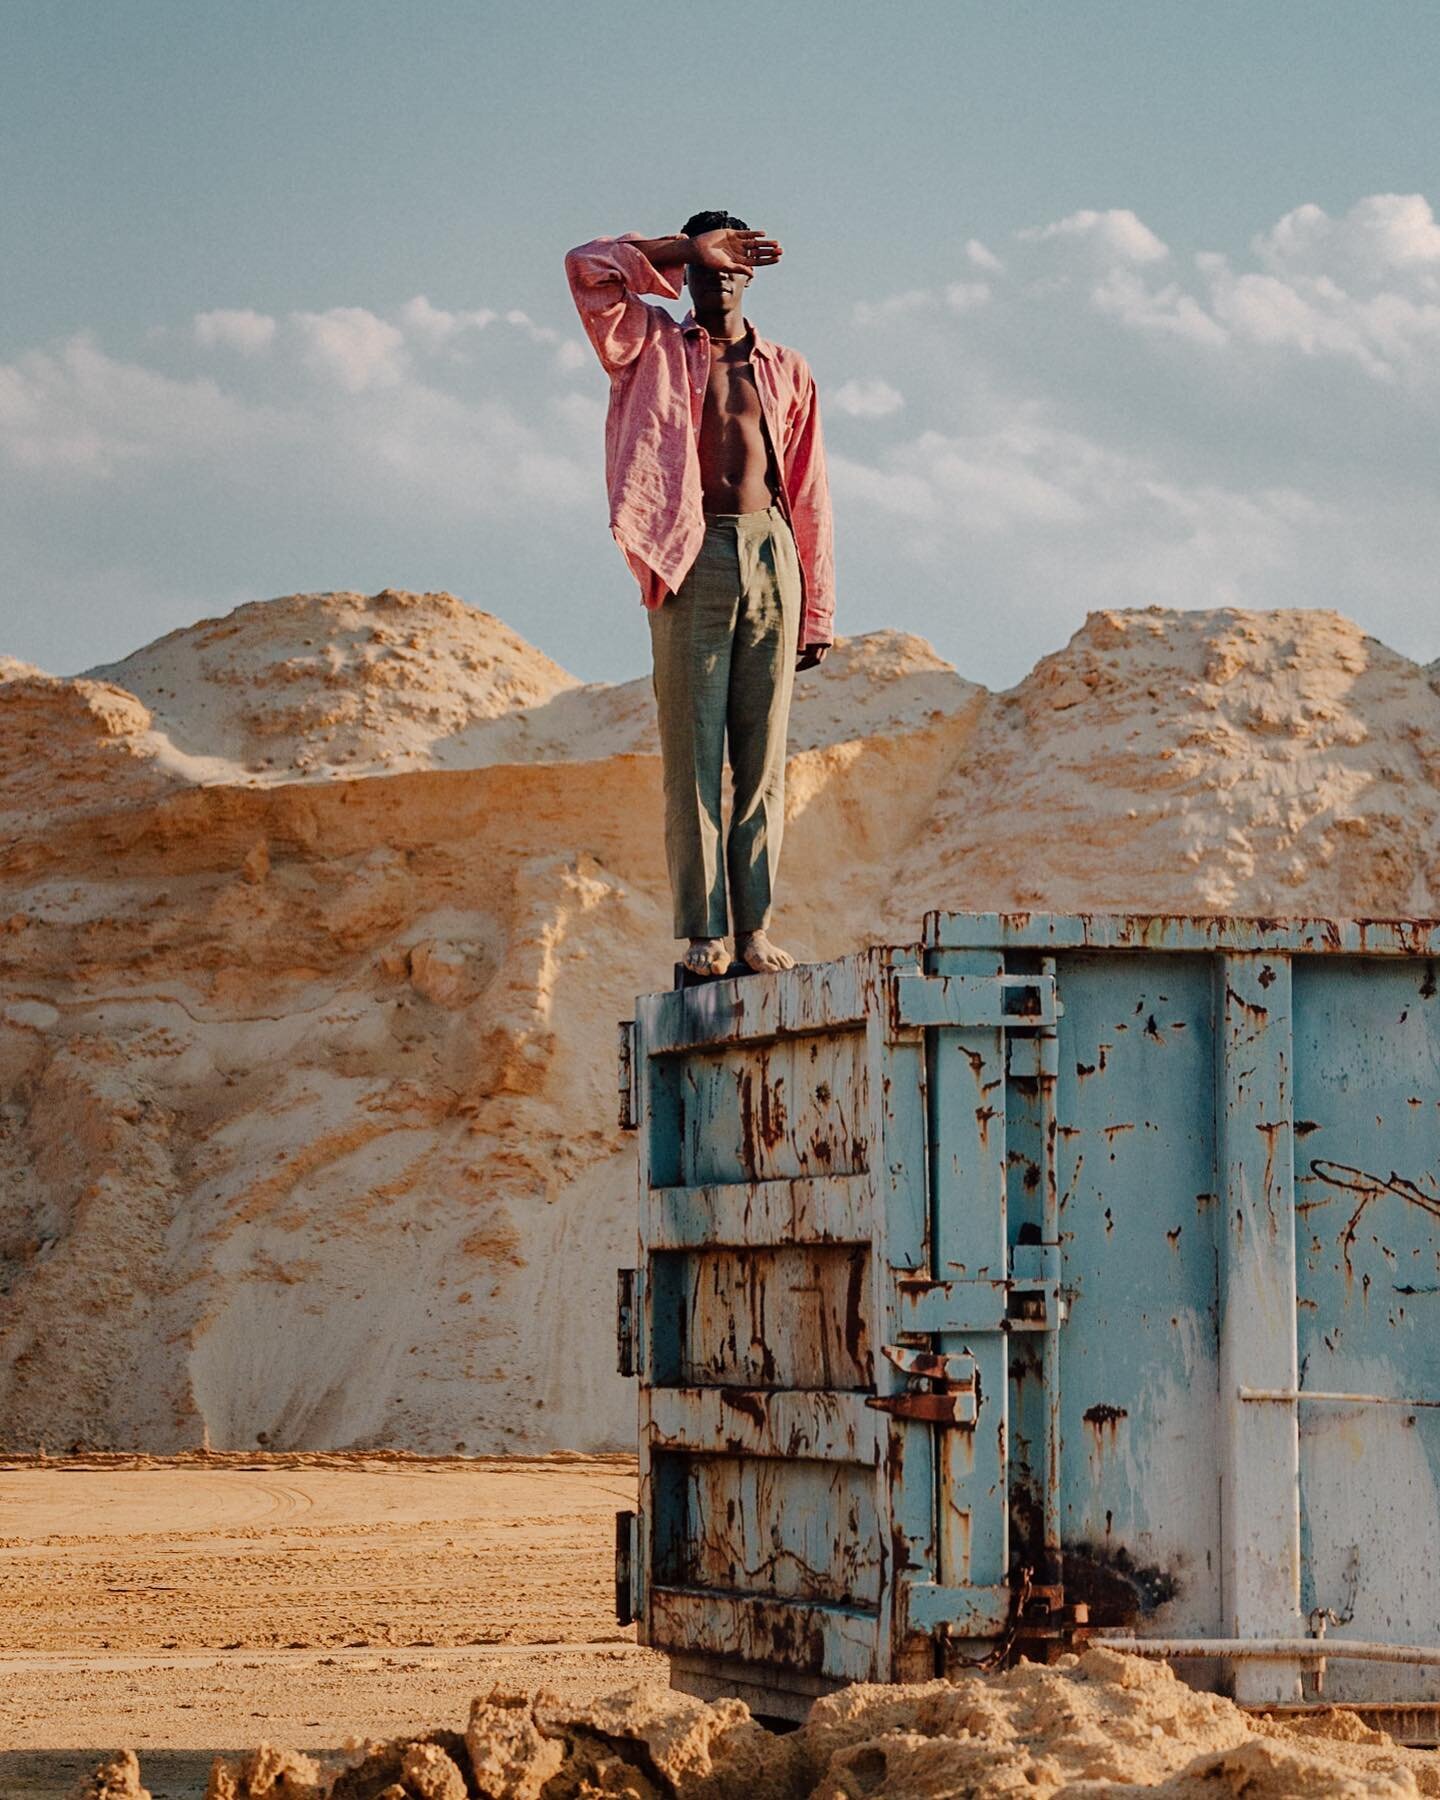 ////// cease to hope and you will cease to fear &mdash;seneca 

this was my first creative shoot for myself in over a year+. A special thanks to Kassoum for being the perfect muse for this location 🏜 

in foto: @kassoumdiakite